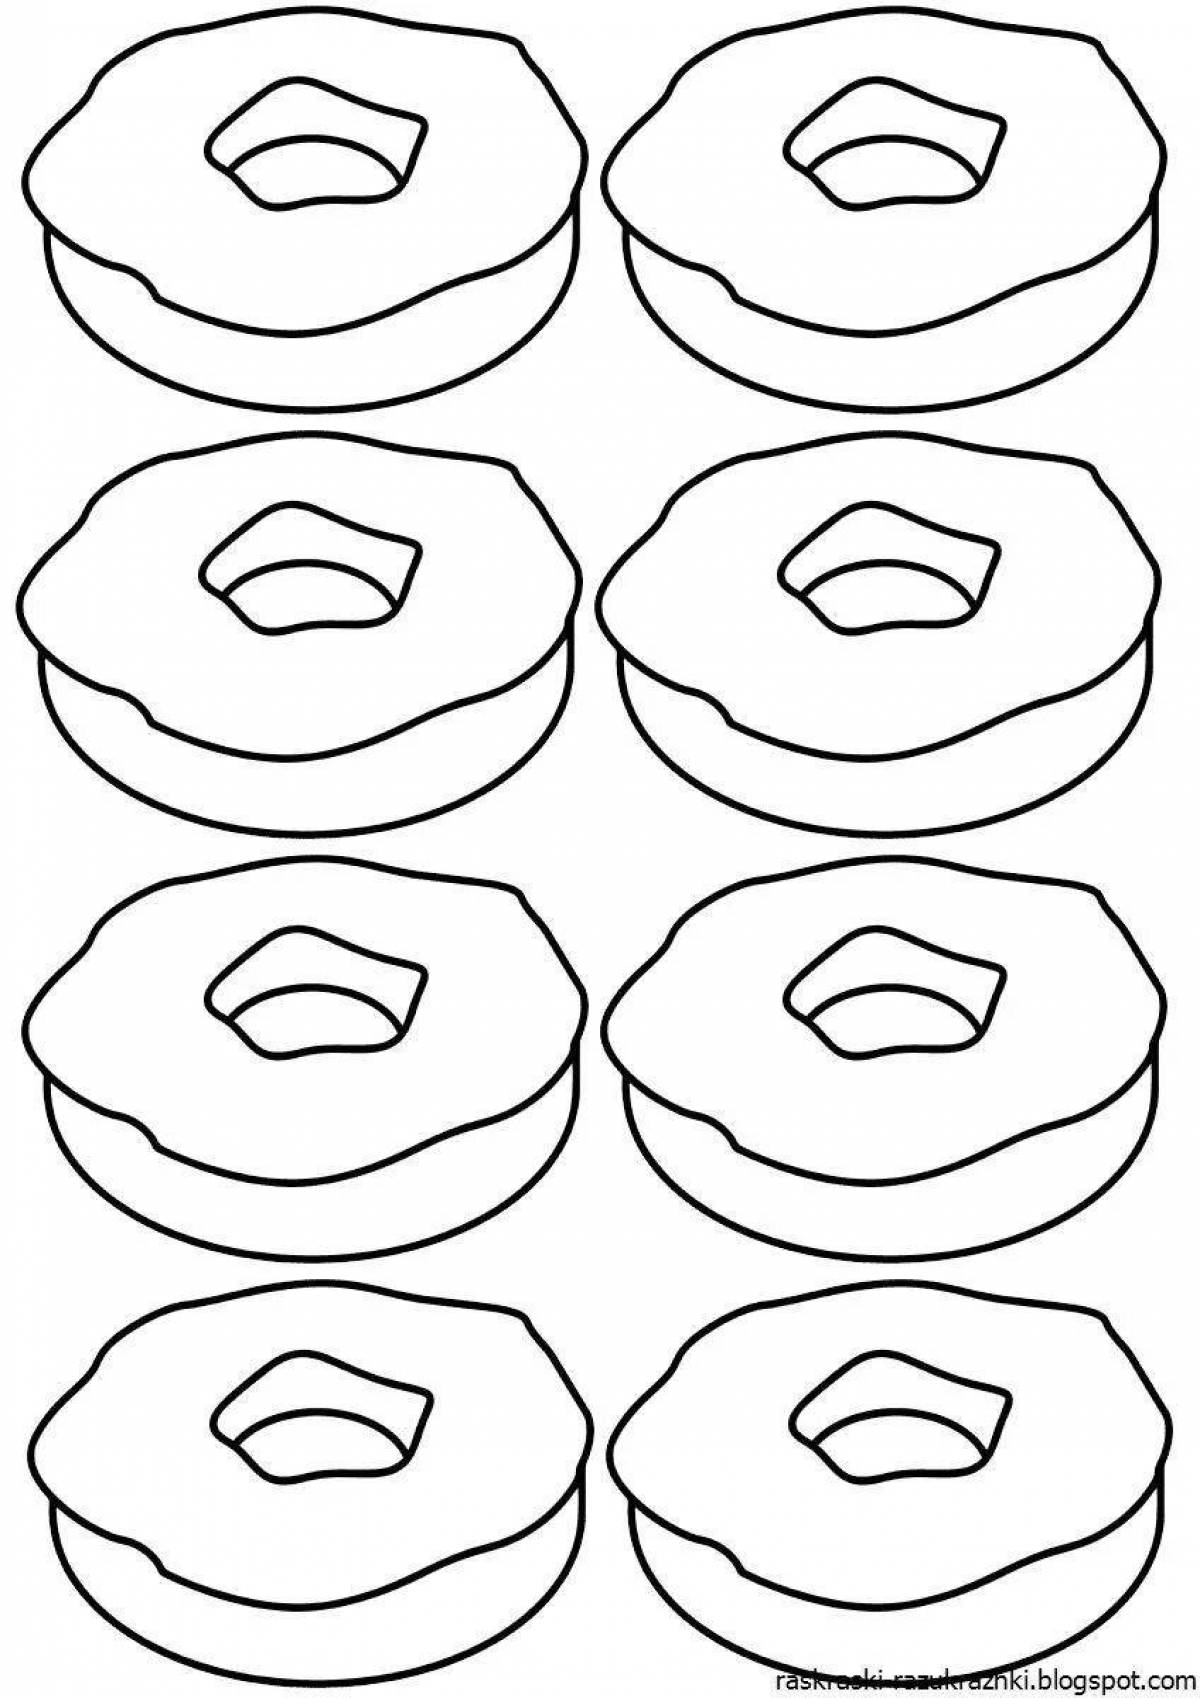 Fun coloring of donuts for girls